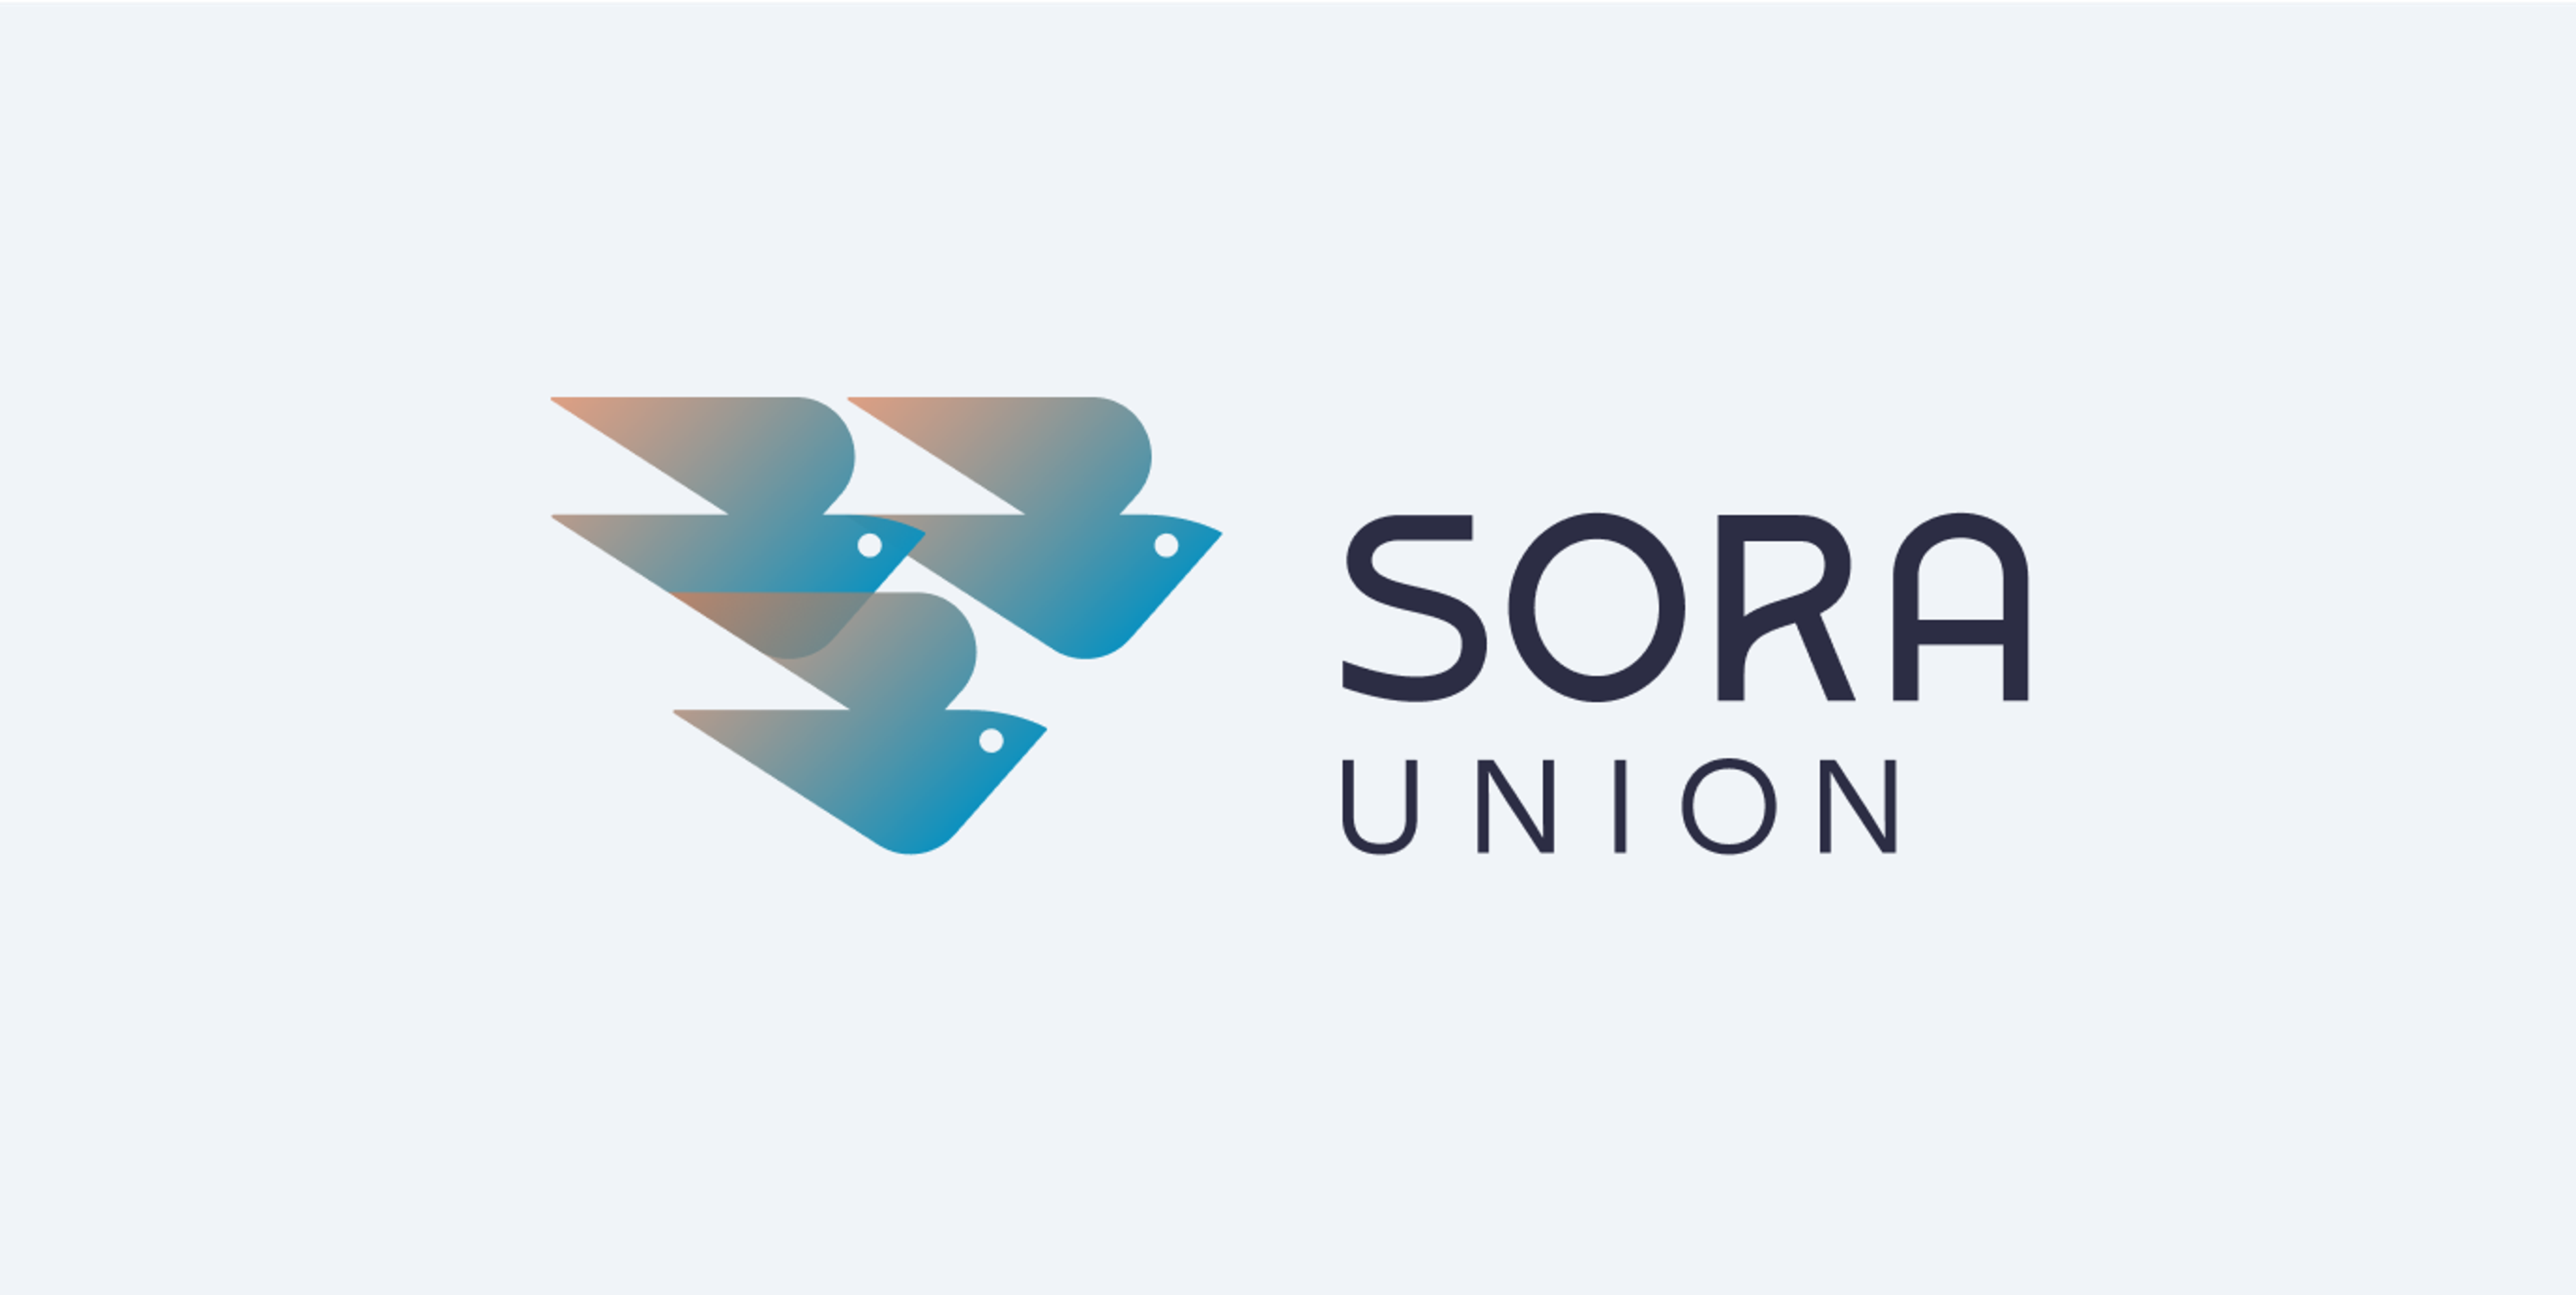 Primary Sora Union logo with the three birds in a coral to aqua gradient and left-aligned Sora Union wordmark on the right